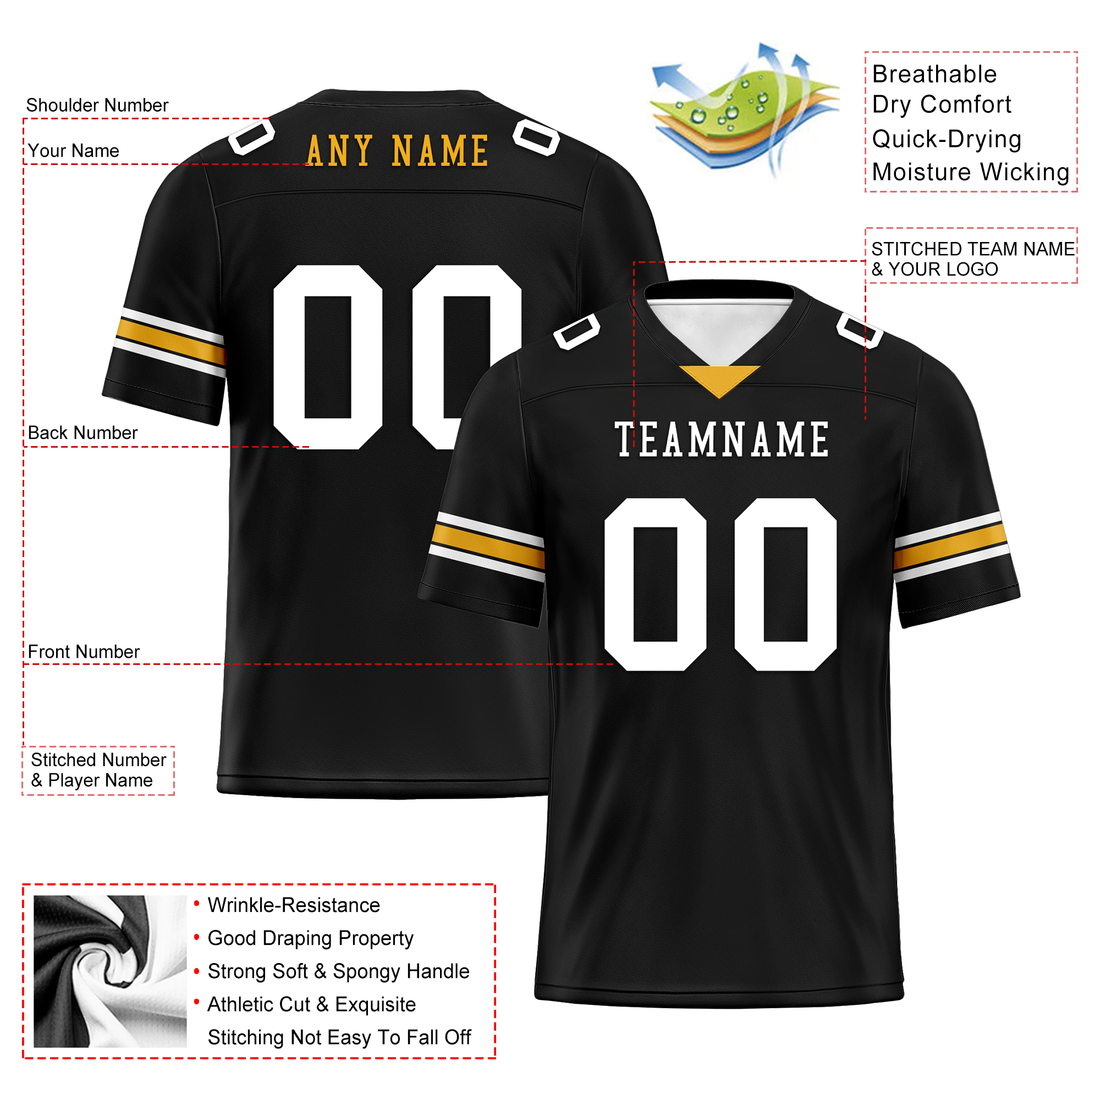 Custom Black Classic Style Personalized Authentic Football Jersey FBJ02-bd0a70a8